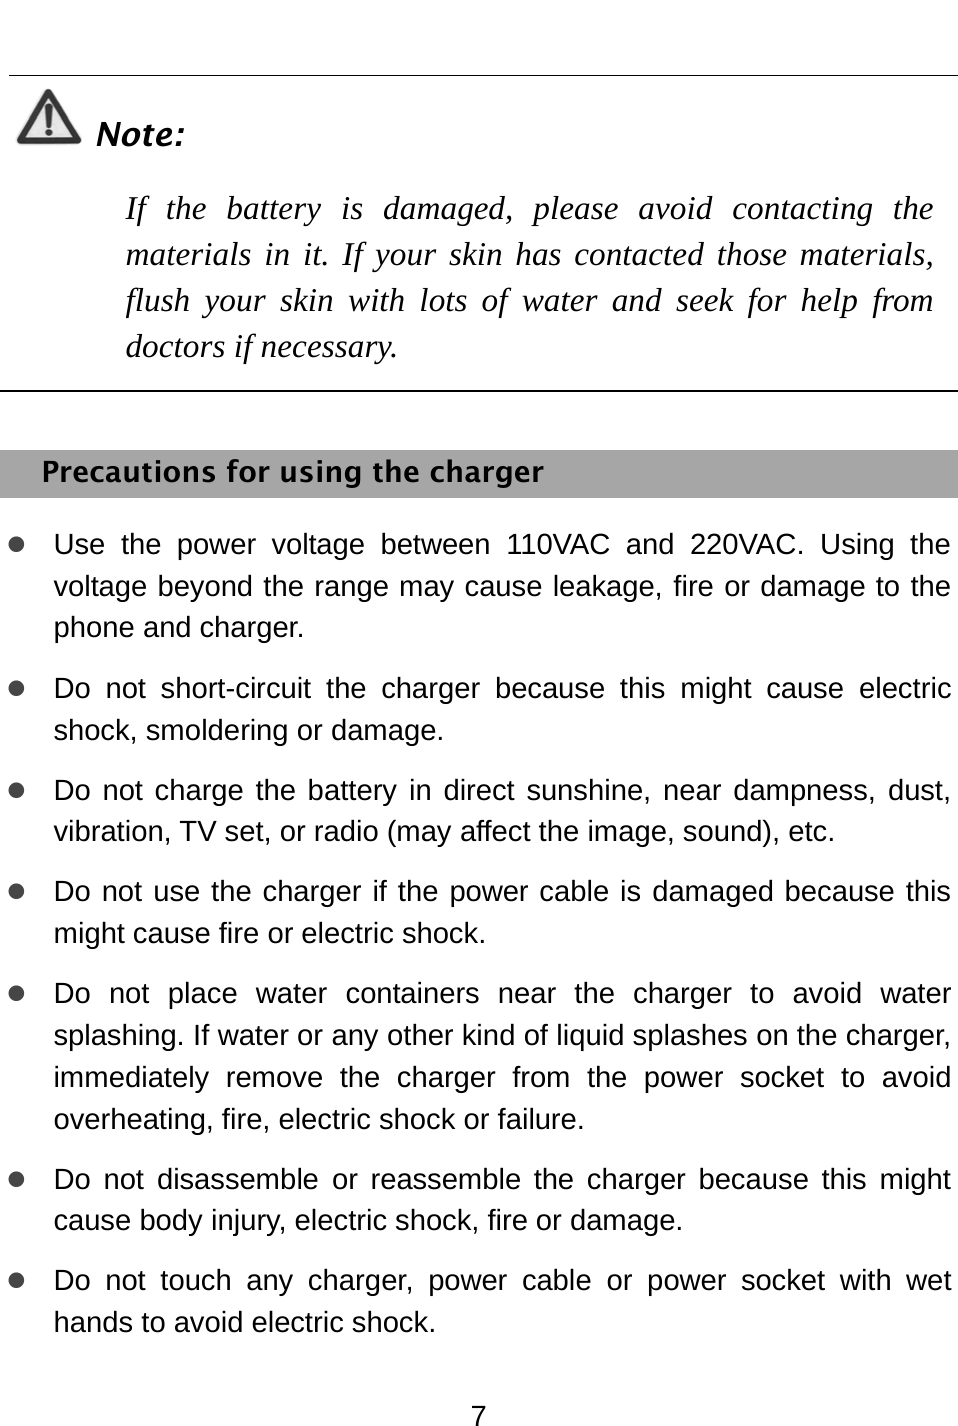  7  Note: If the battery is damaged, please avoid contacting the materials in it. If your skin has contacted those materials, flush your skin with lots of water and seek for help from doctors if necessary.  Precautions for using the charger z Use the power voltage between 110VAC and 220VAC. Using the voltage beyond the range may cause leakage, fire or damage to the phone and charger. z Do not short-circuit the charger because this might cause electric shock, smoldering or damage. z Do not charge the battery in direct sunshine, near dampness, dust, vibration, TV set, or radio (may affect the image, sound), etc. z Do not use the charger if the power cable is damaged because this might cause fire or electric shock. z Do not place water containers near the charger to avoid water splashing. If water or any other kind of liquid splashes on the charger, immediately remove the charger from the power socket to avoid overheating, fire, electric shock or failure. z Do not disassemble or reassemble the charger because this might cause body injury, electric shock, fire or damage. z Do not touch any charger, power cable or power socket with wet hands to avoid electric shock. 